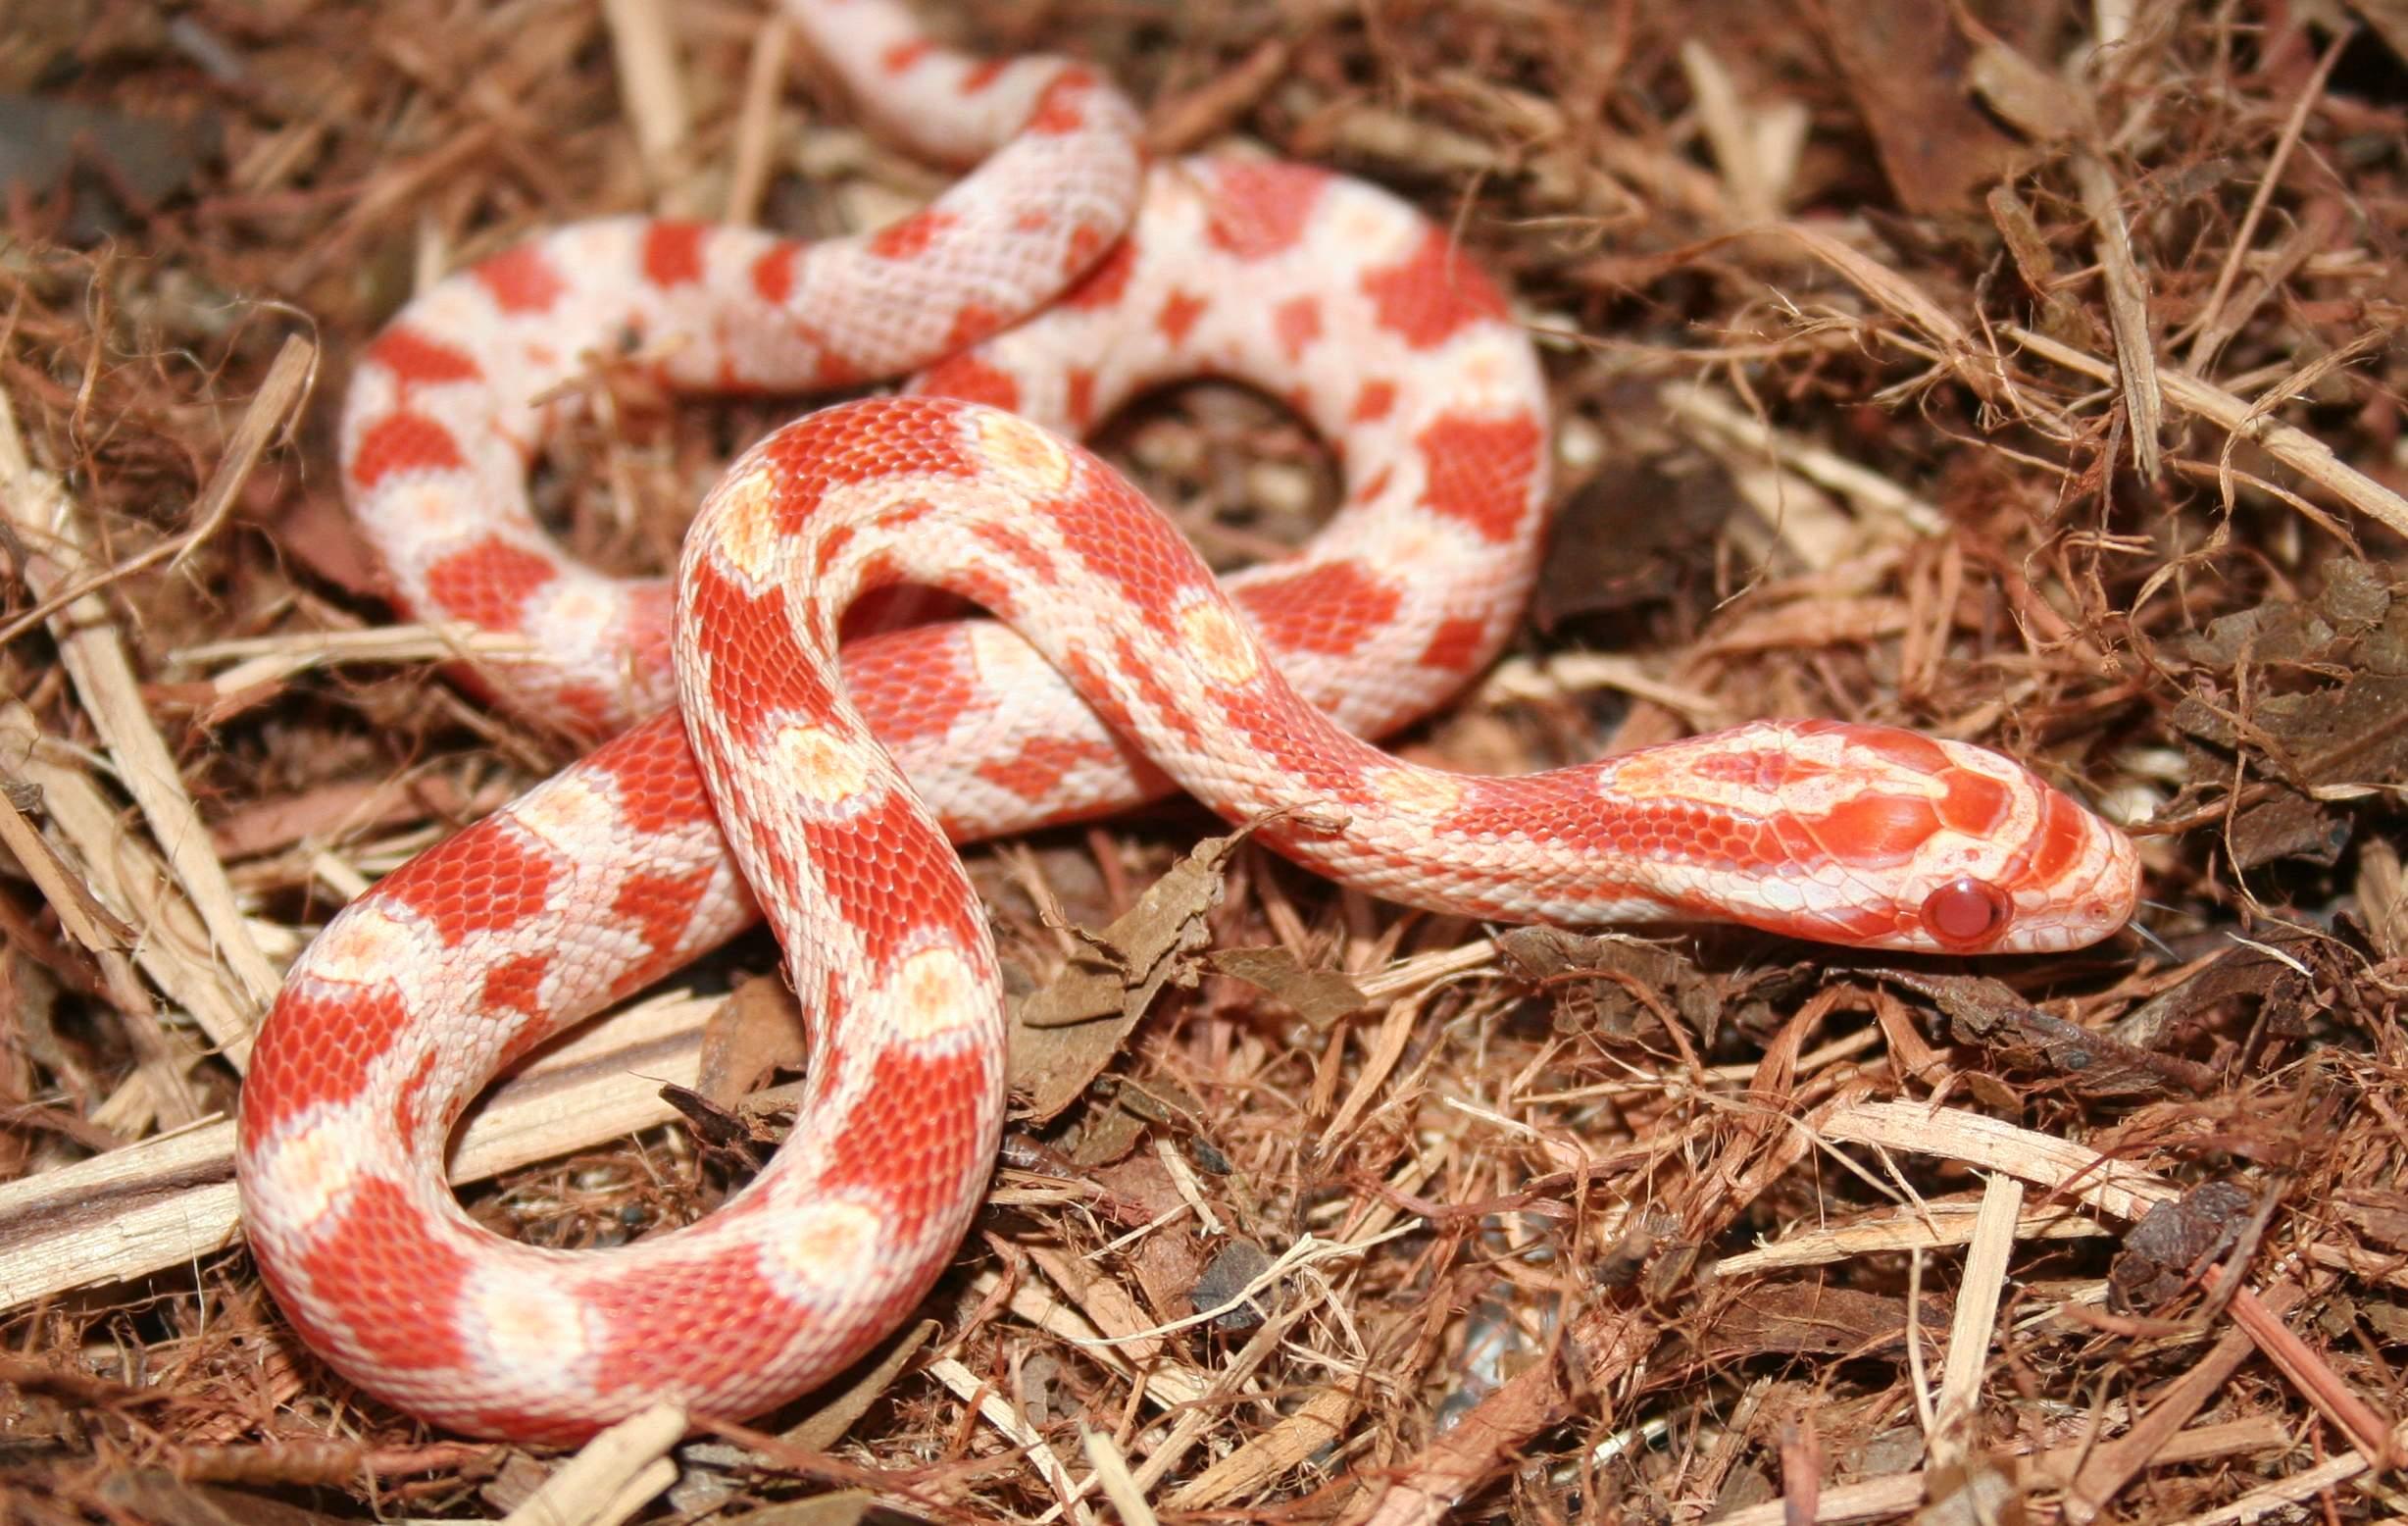 Corn Snake Backgrounds, Compatible - PC, Mobile, Gadgets| 2456x1556 px